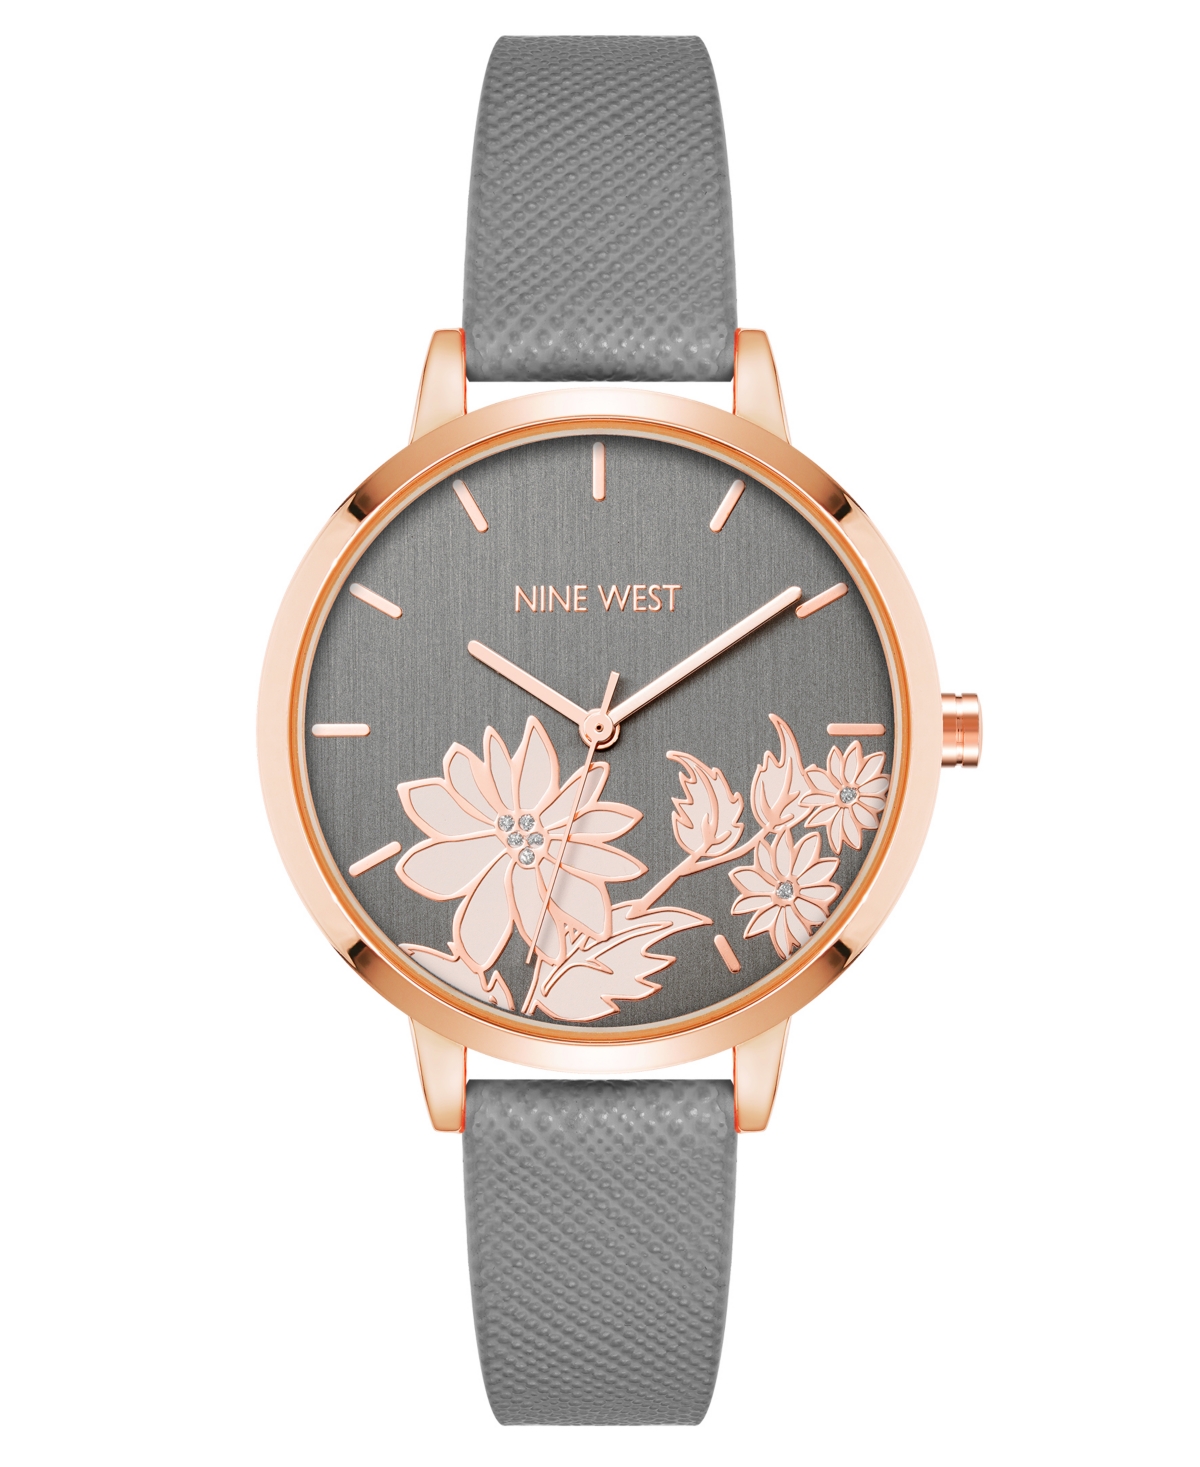 Nine West Woman's Quartz Gray Faux Leather Band And Floral Pattern Watch, 36mm In Gray,rose Gold-tone